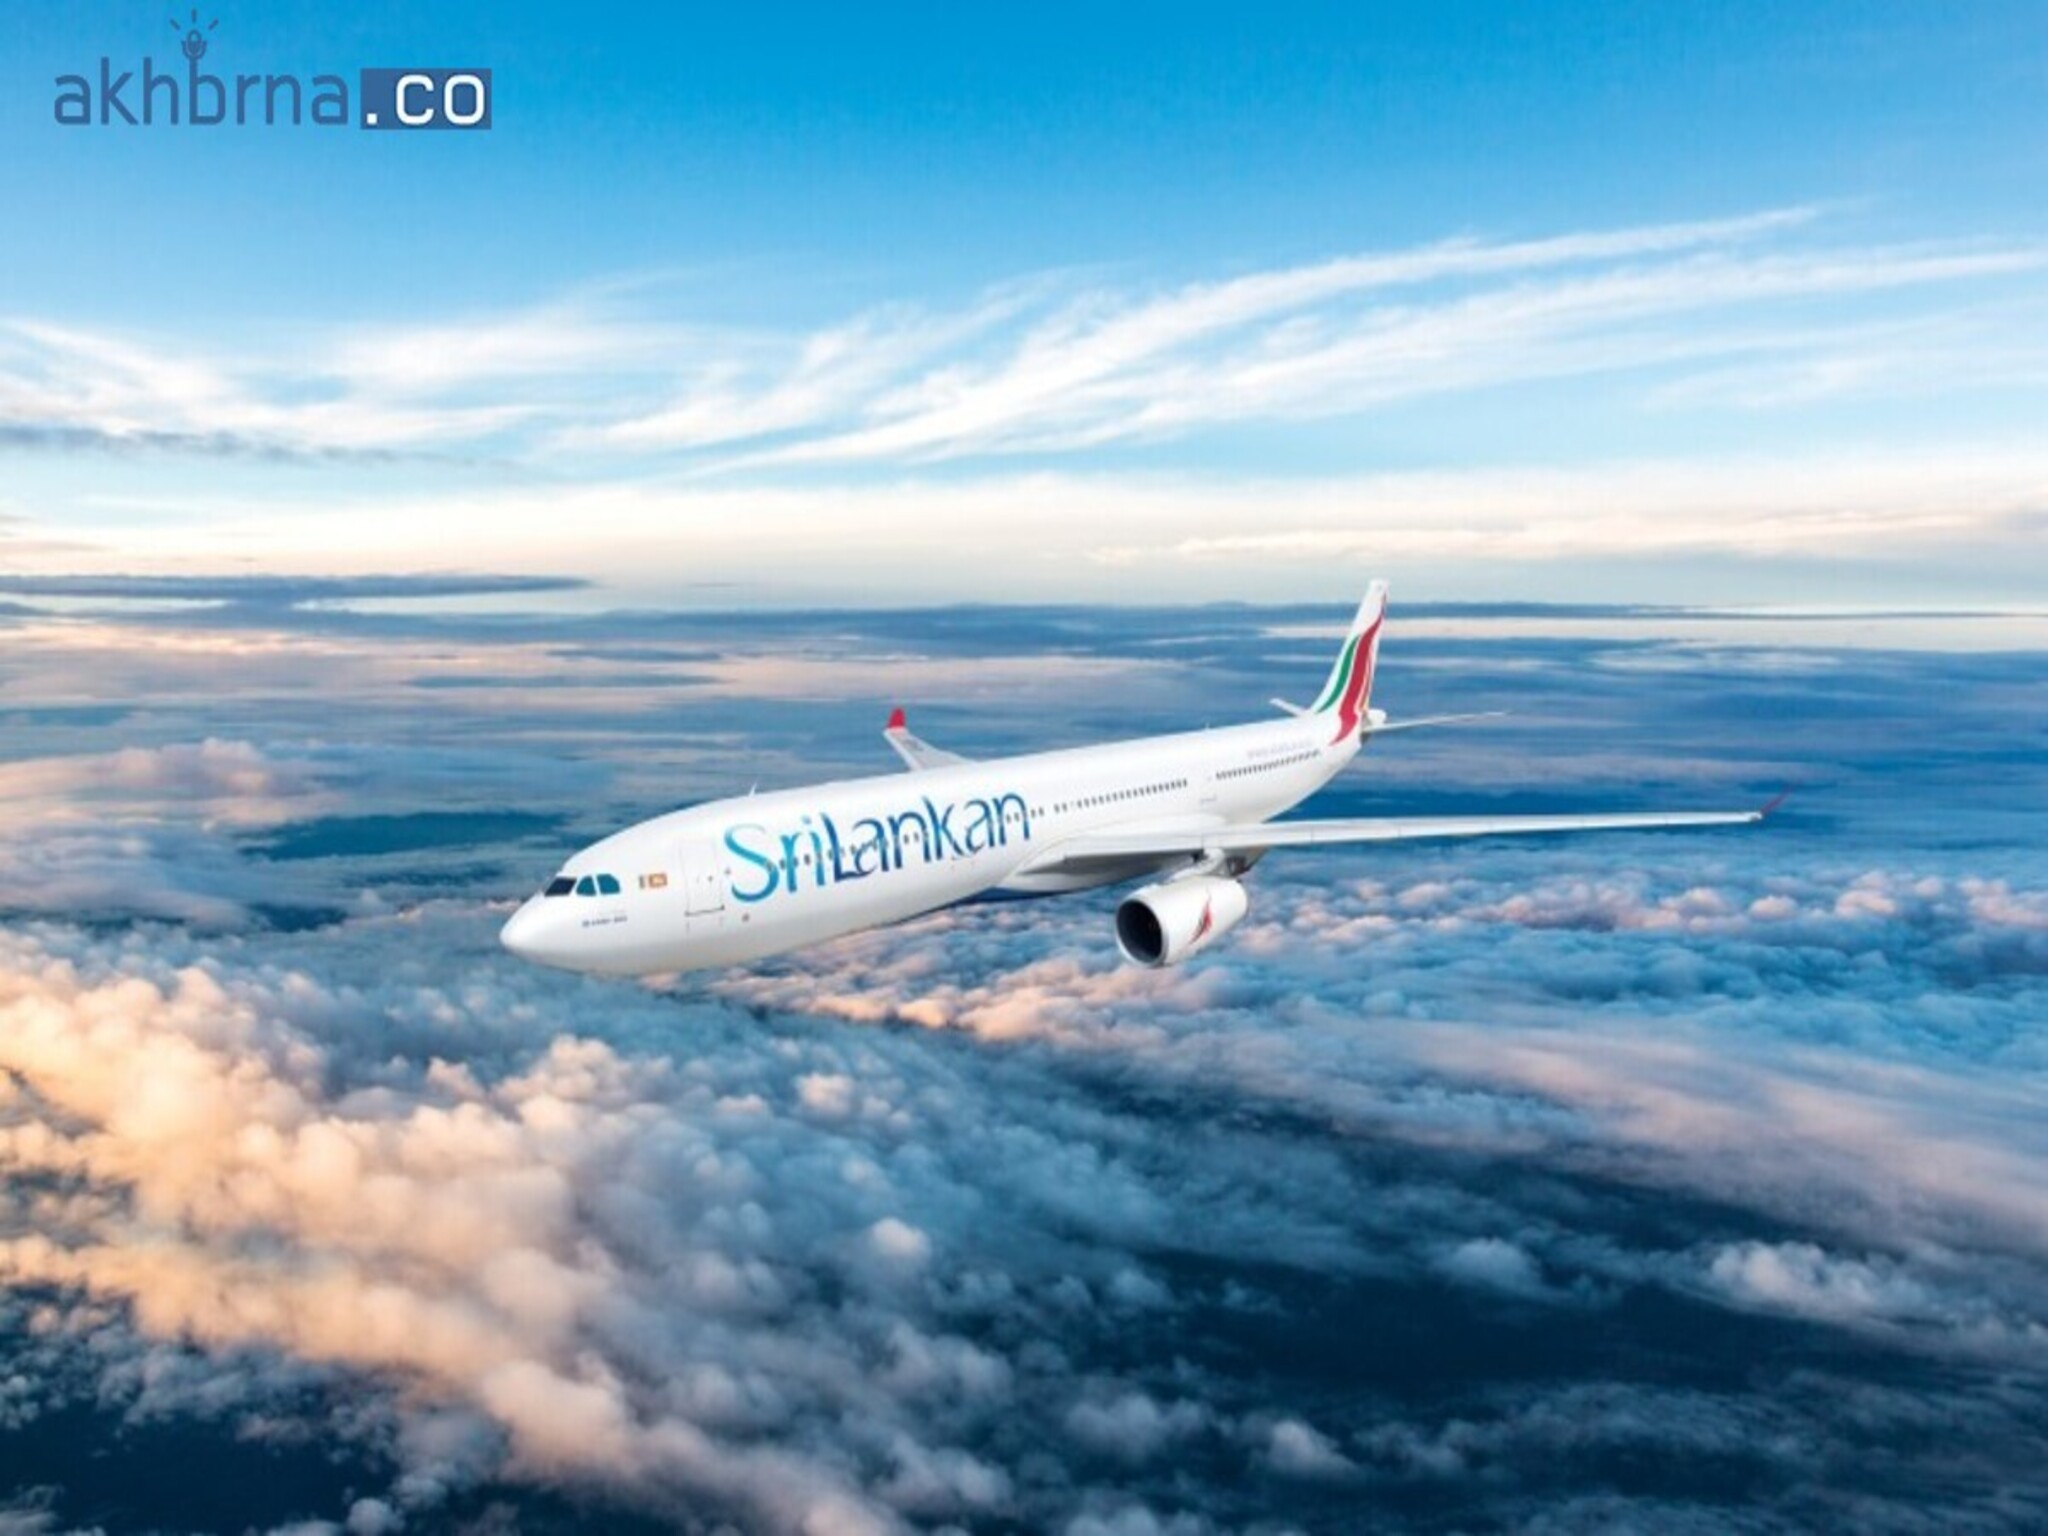 SriLankan Airlines prepares for expansion across the Middle East with new routes